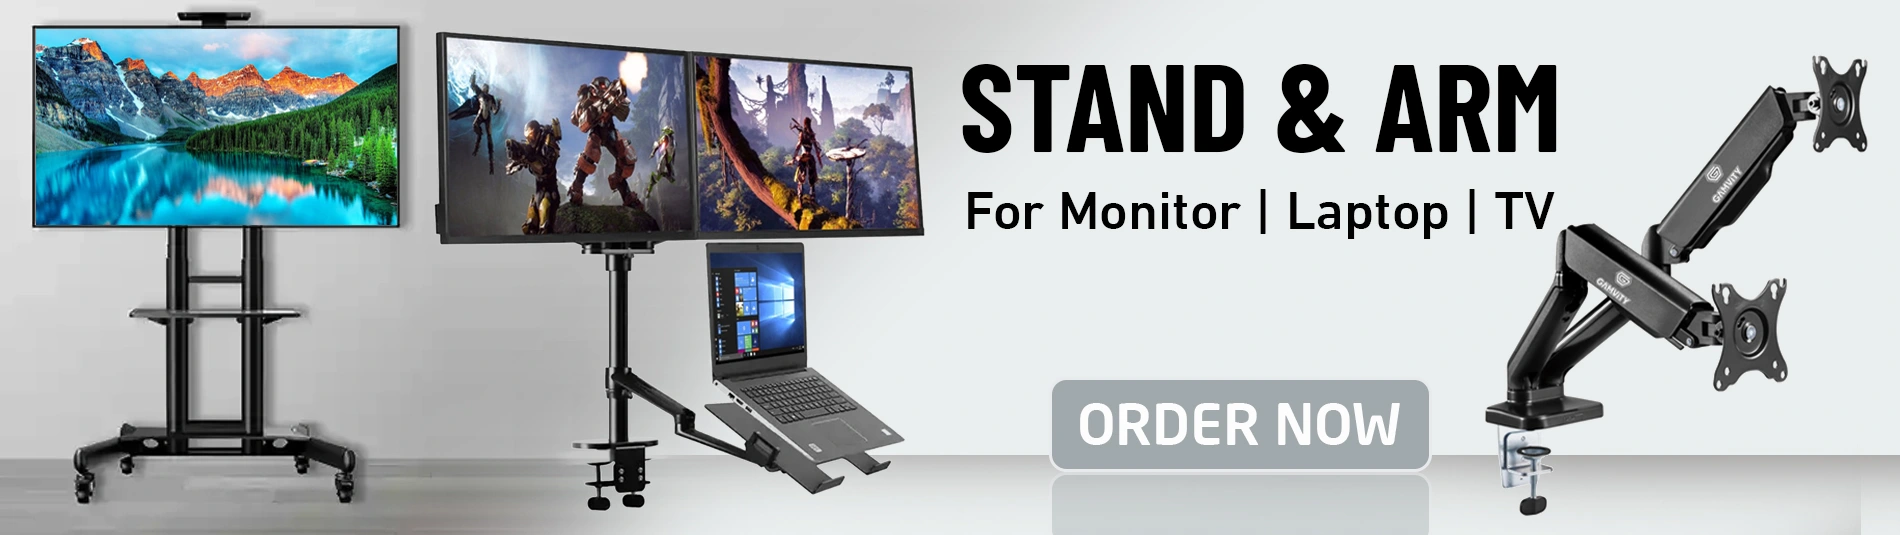 Monitor_arm_stand-1900x535